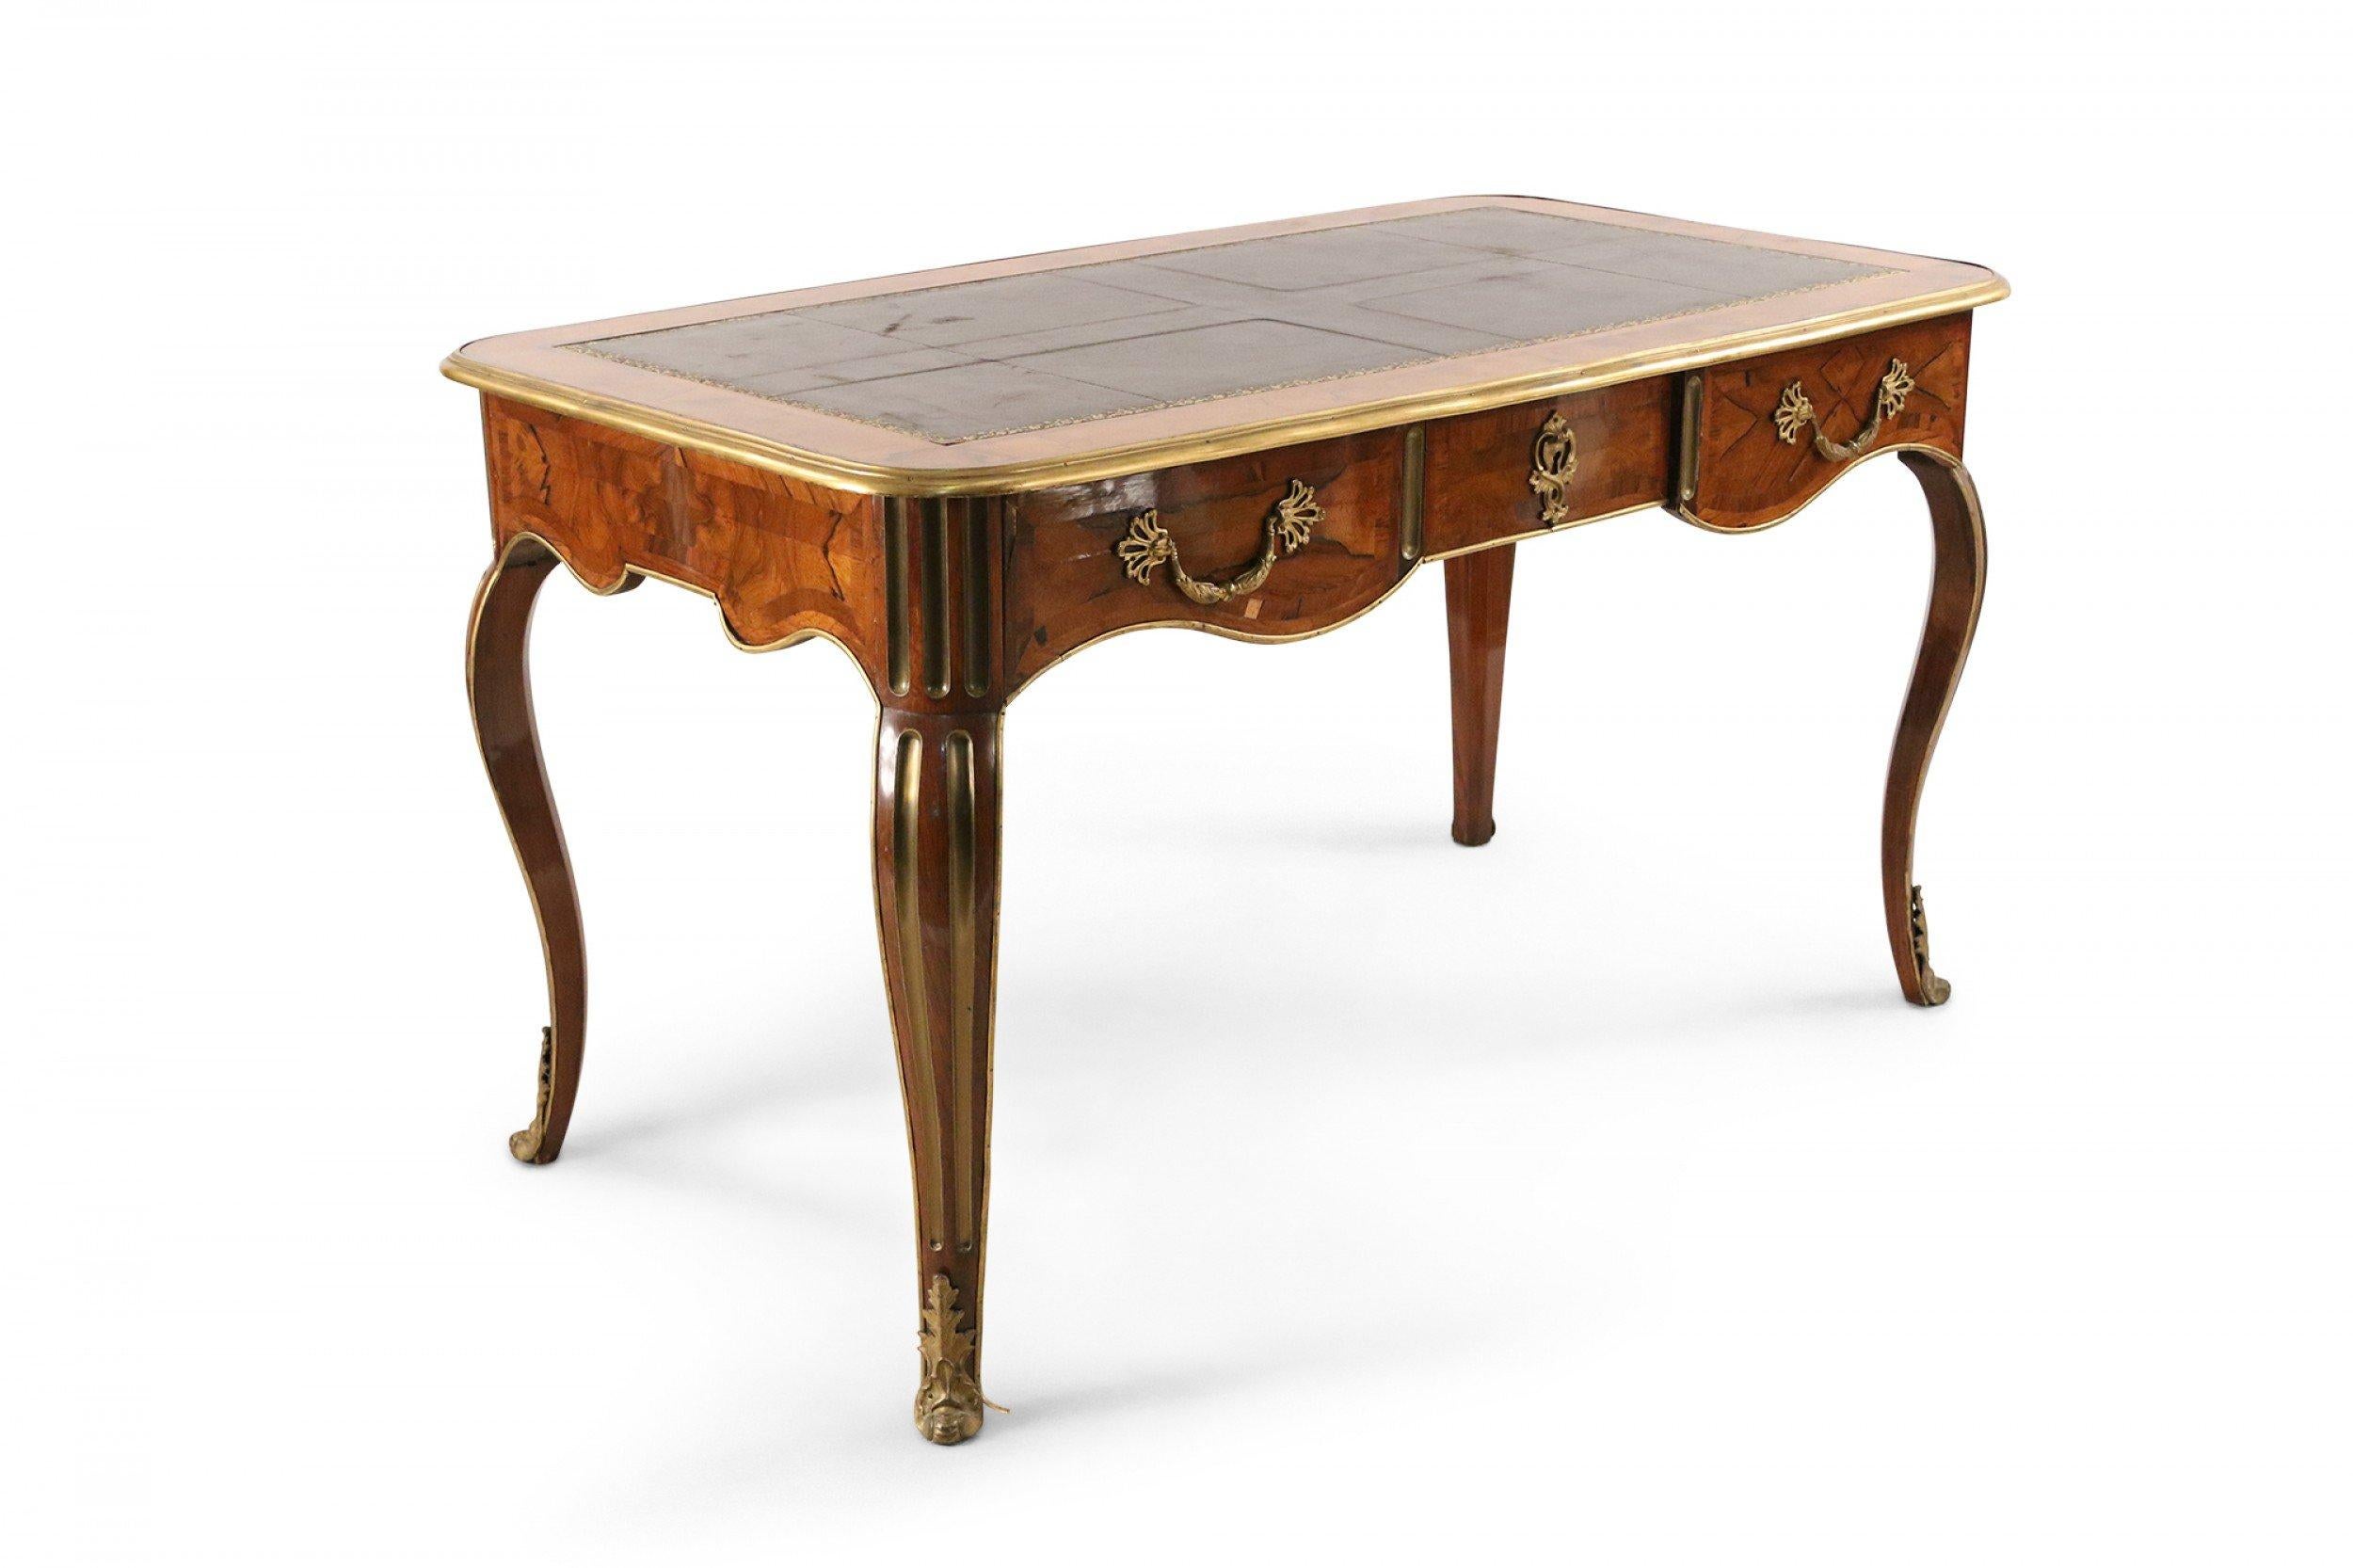 French Louis XV style 19th century kingwood inlaid veneer desk with inset brown leather top with gilt embossed edge design with a brass top border and brass fluted trim legs and feet.